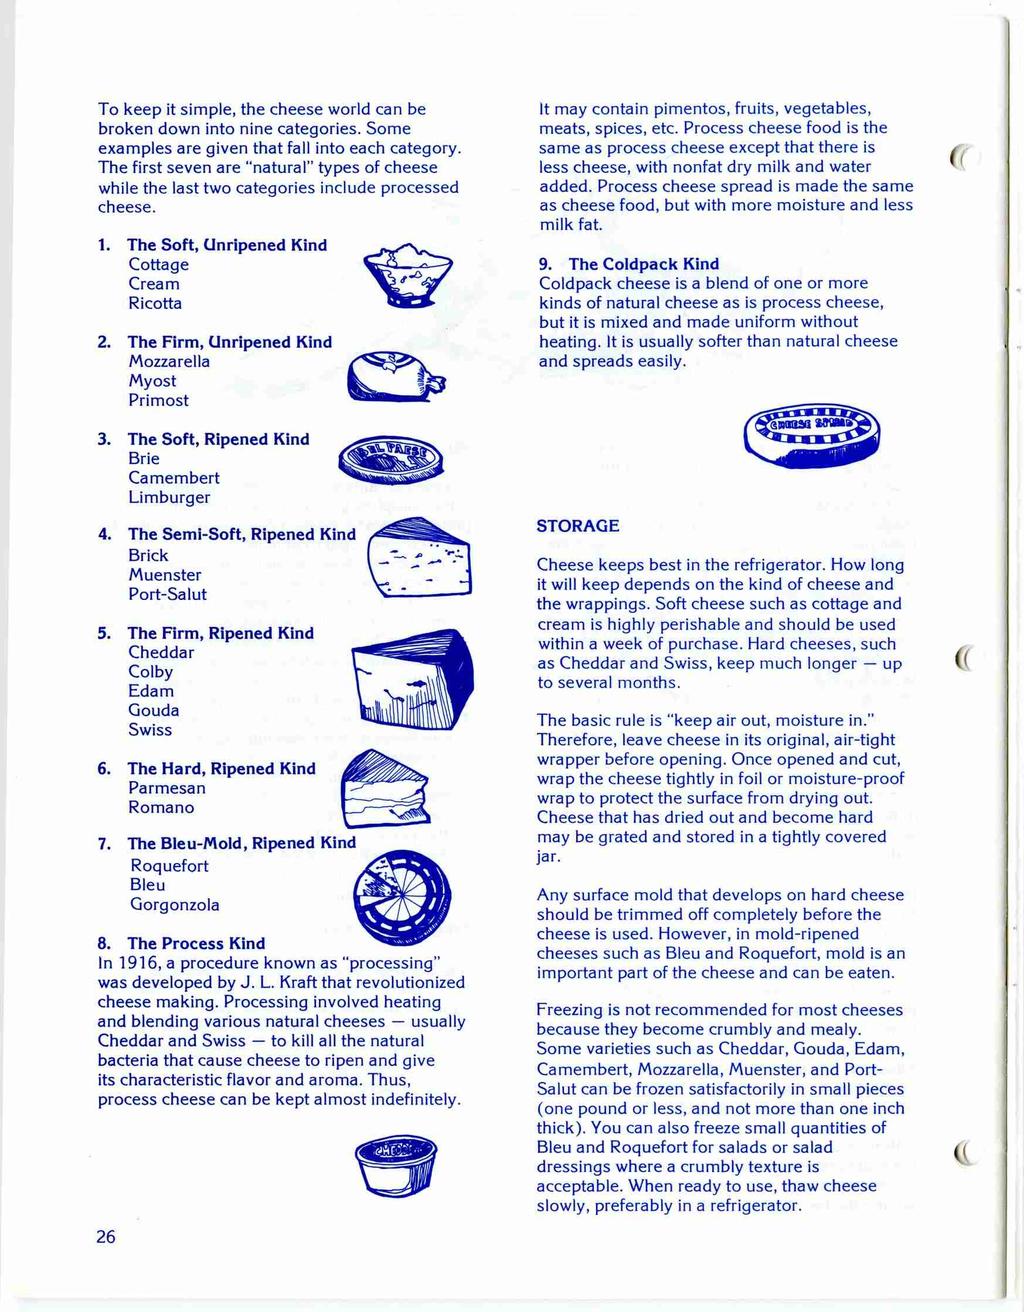 To keep it simple, the cheese world can be broken down into nine categories. Some examples are given that fall into each category.